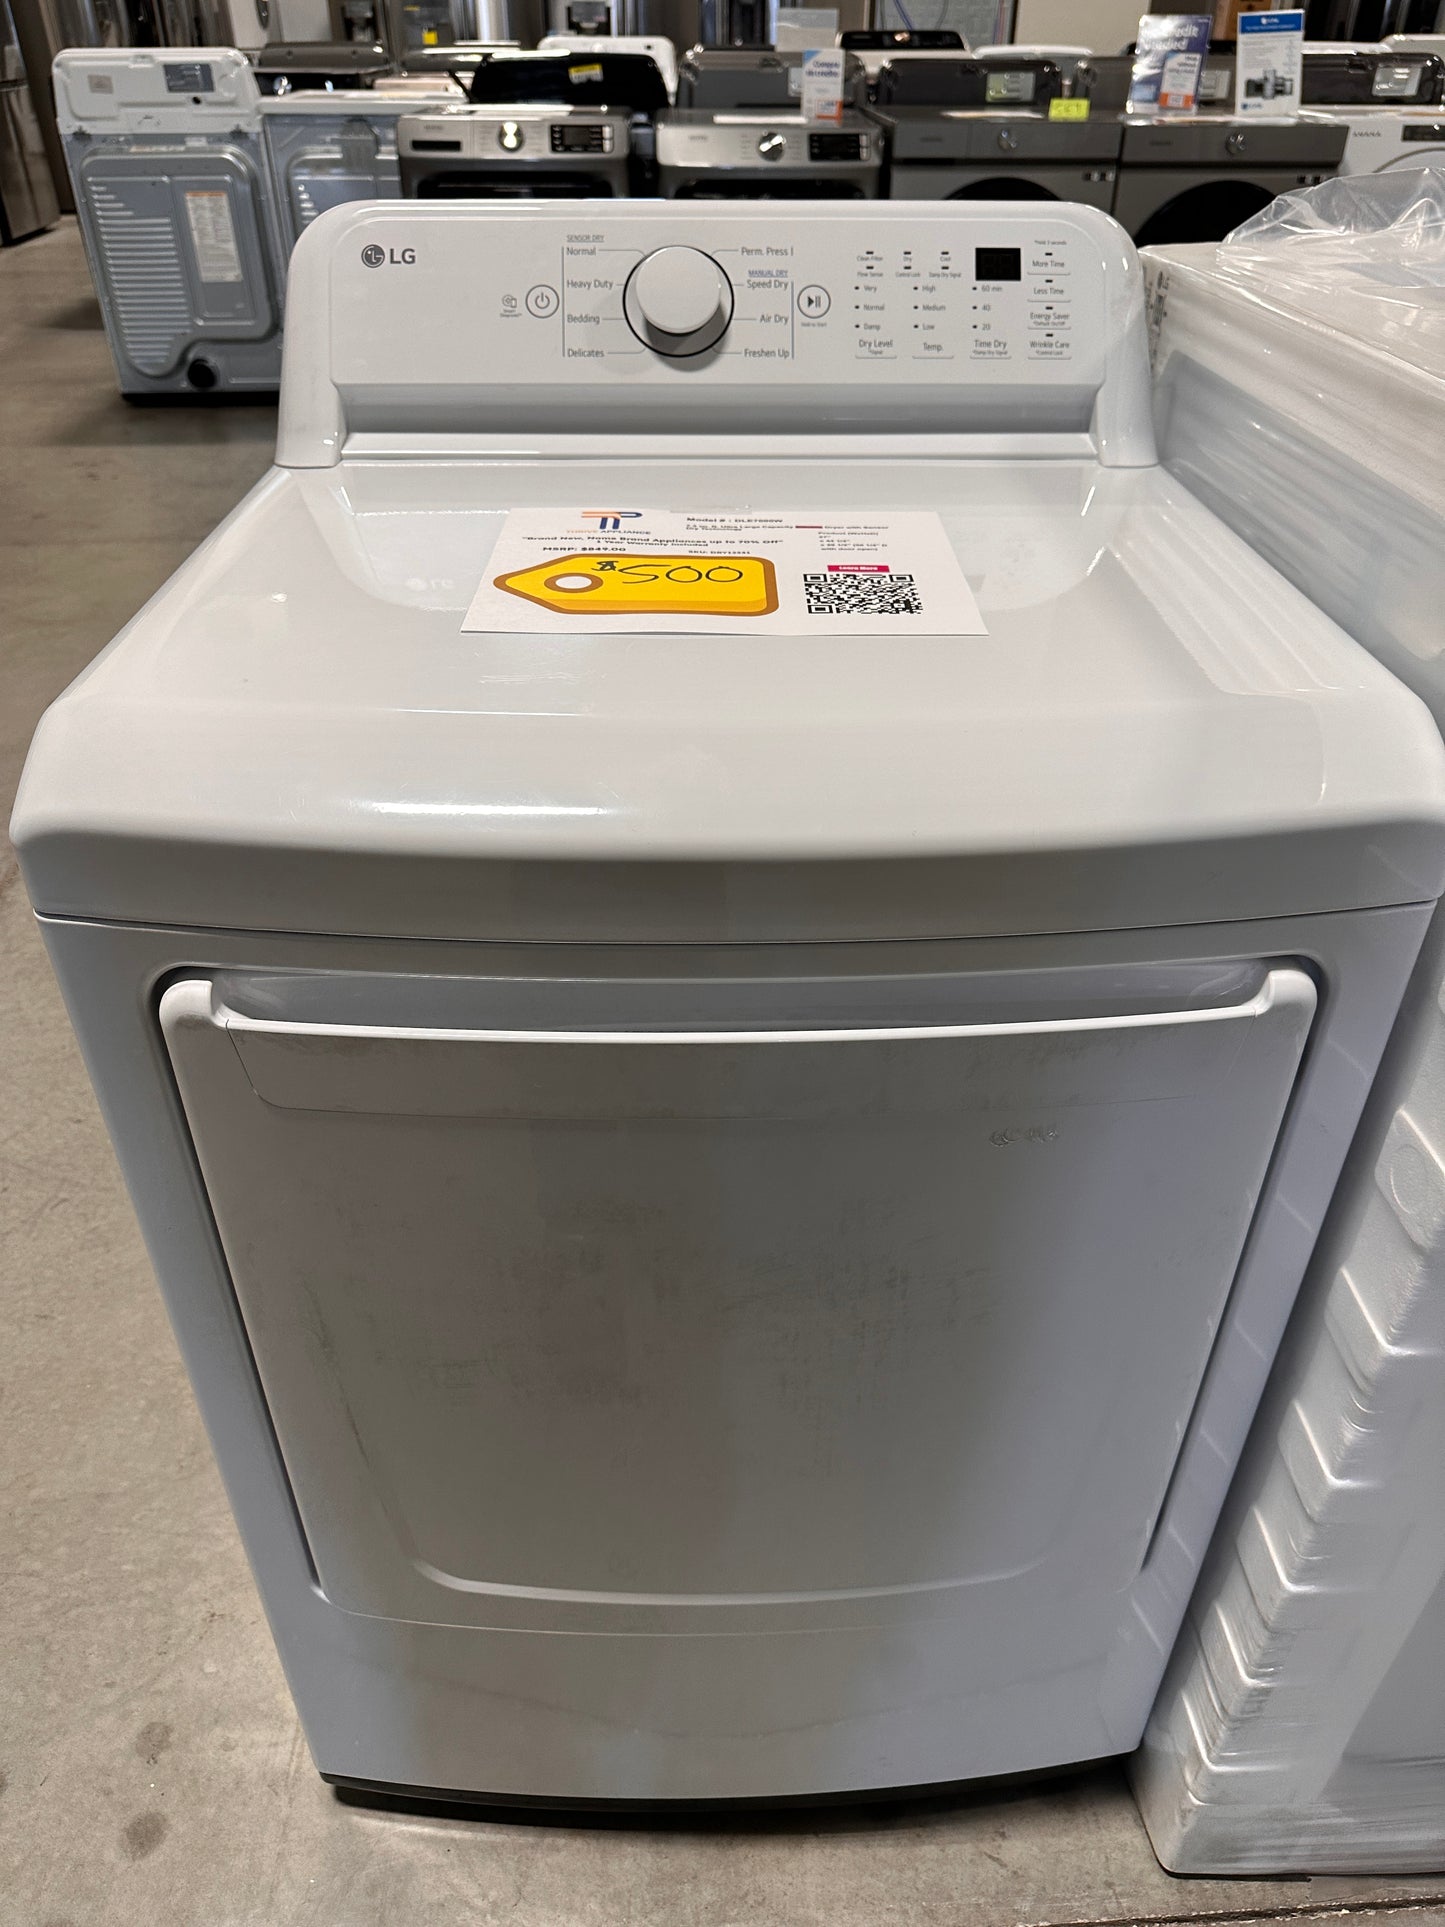 NEW LG - 7.3 cu ft Electric Dryer with Sensor Dry - White  Model:DLE7000W  DRY12331